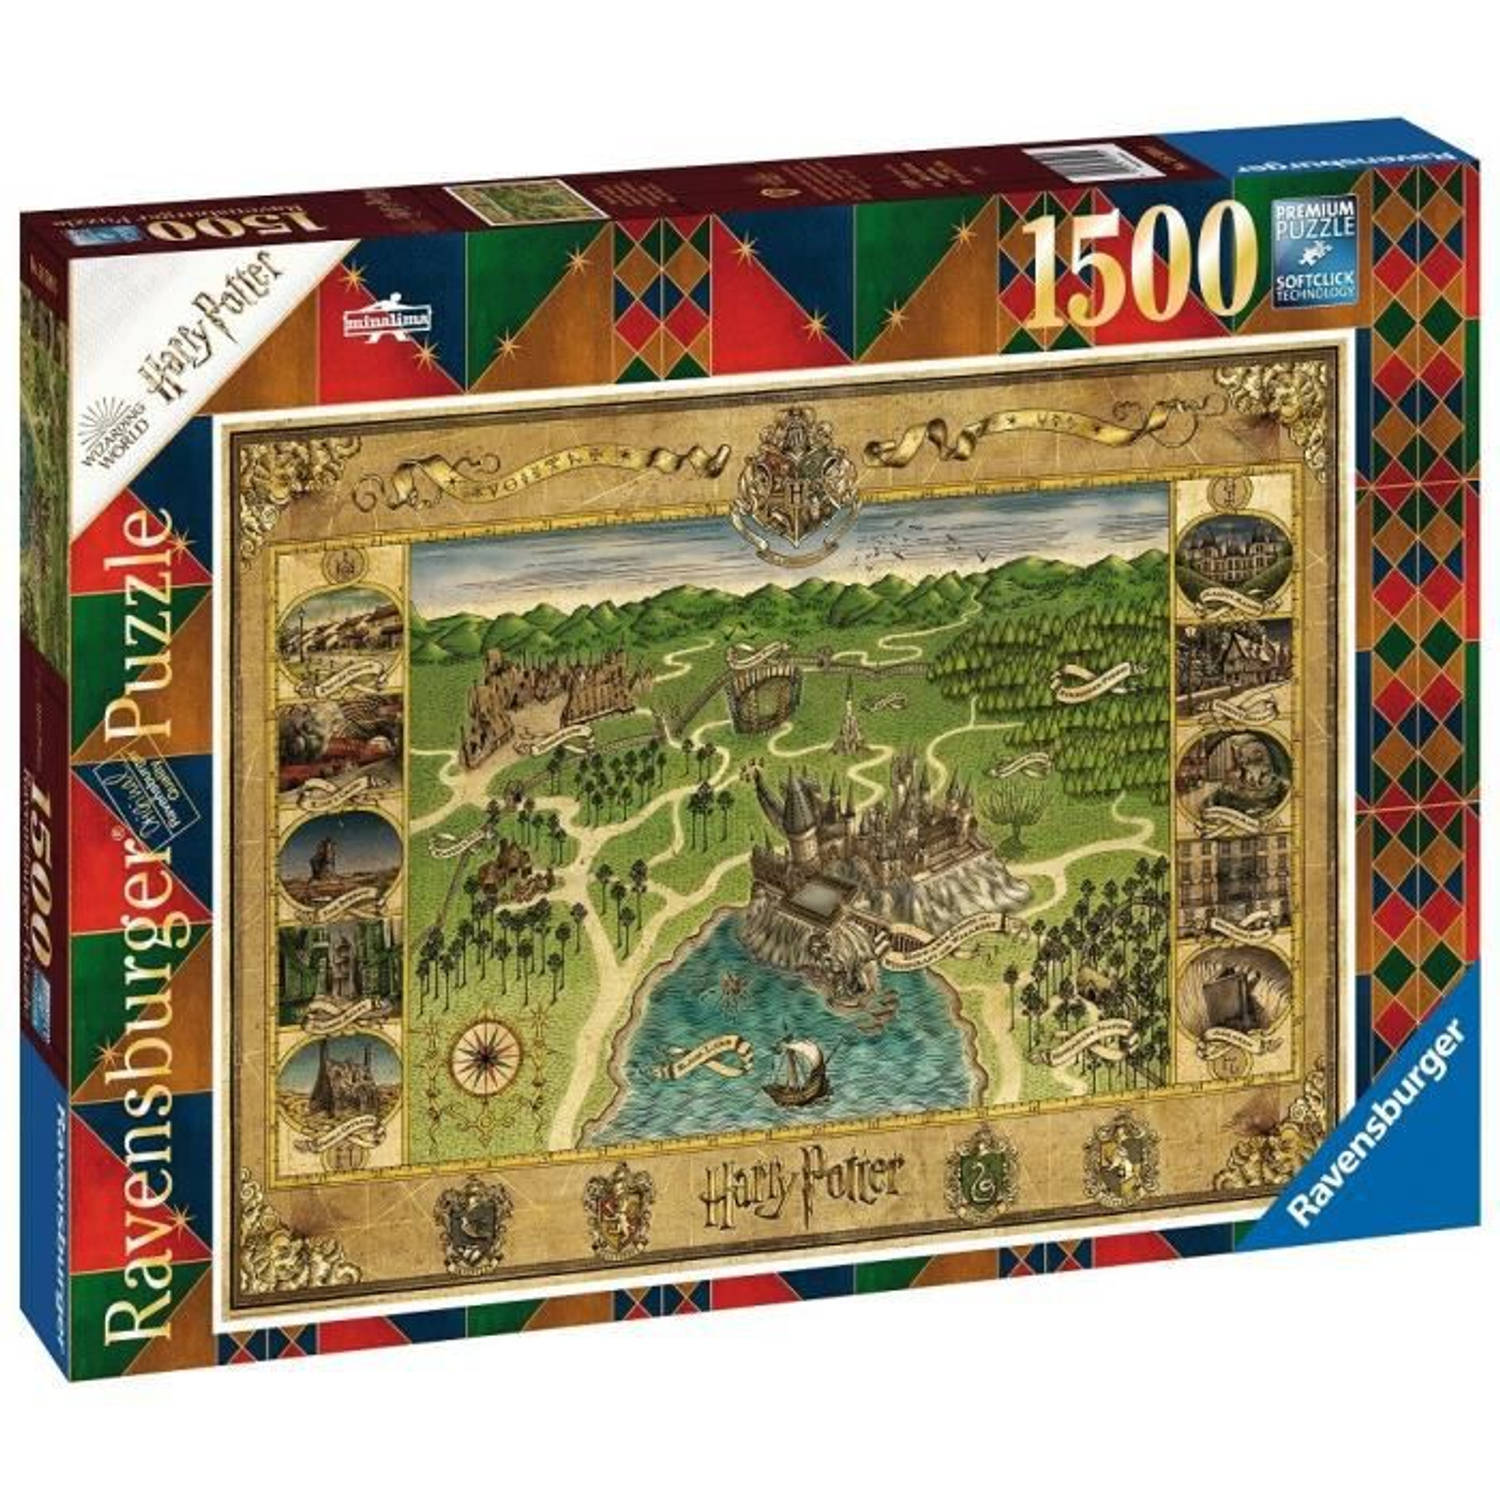 Harry Potter Jigsaw Puzzle Hogwarts Map (1500 pieces)